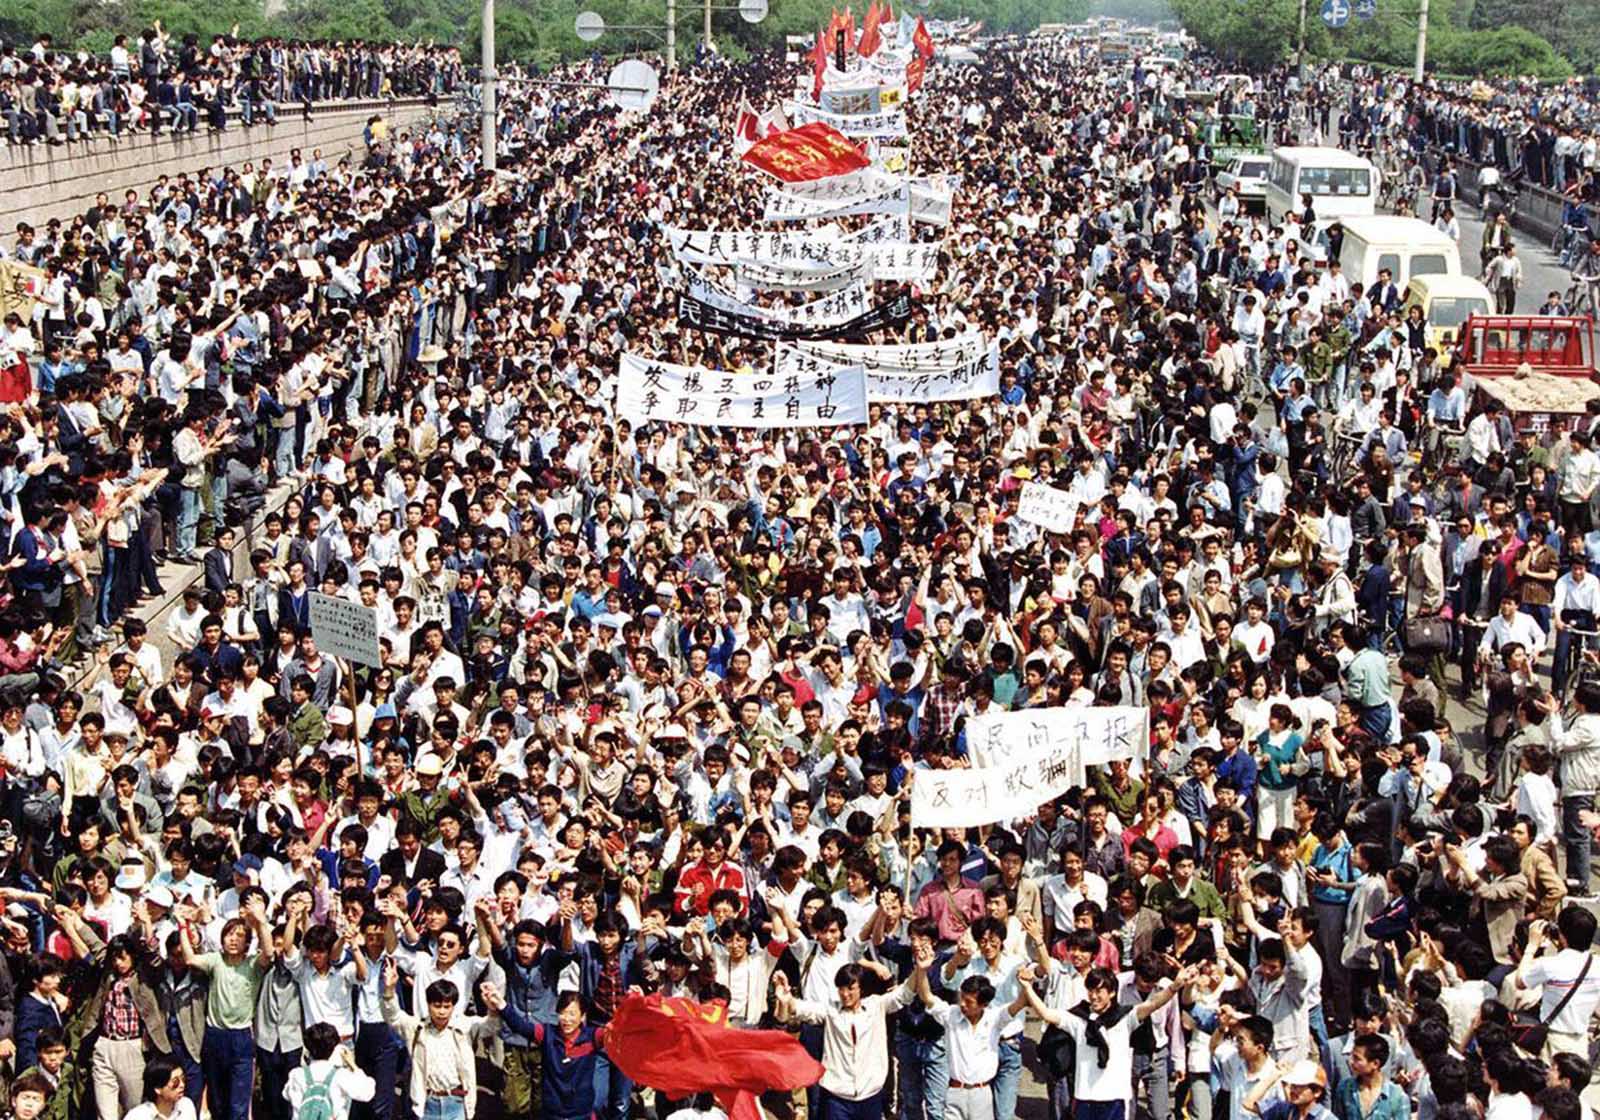 Thousands of students from local colleges and universities march to Tiananmen Square, Beijing, on May 4, 1989, to demonstrate for government reform.